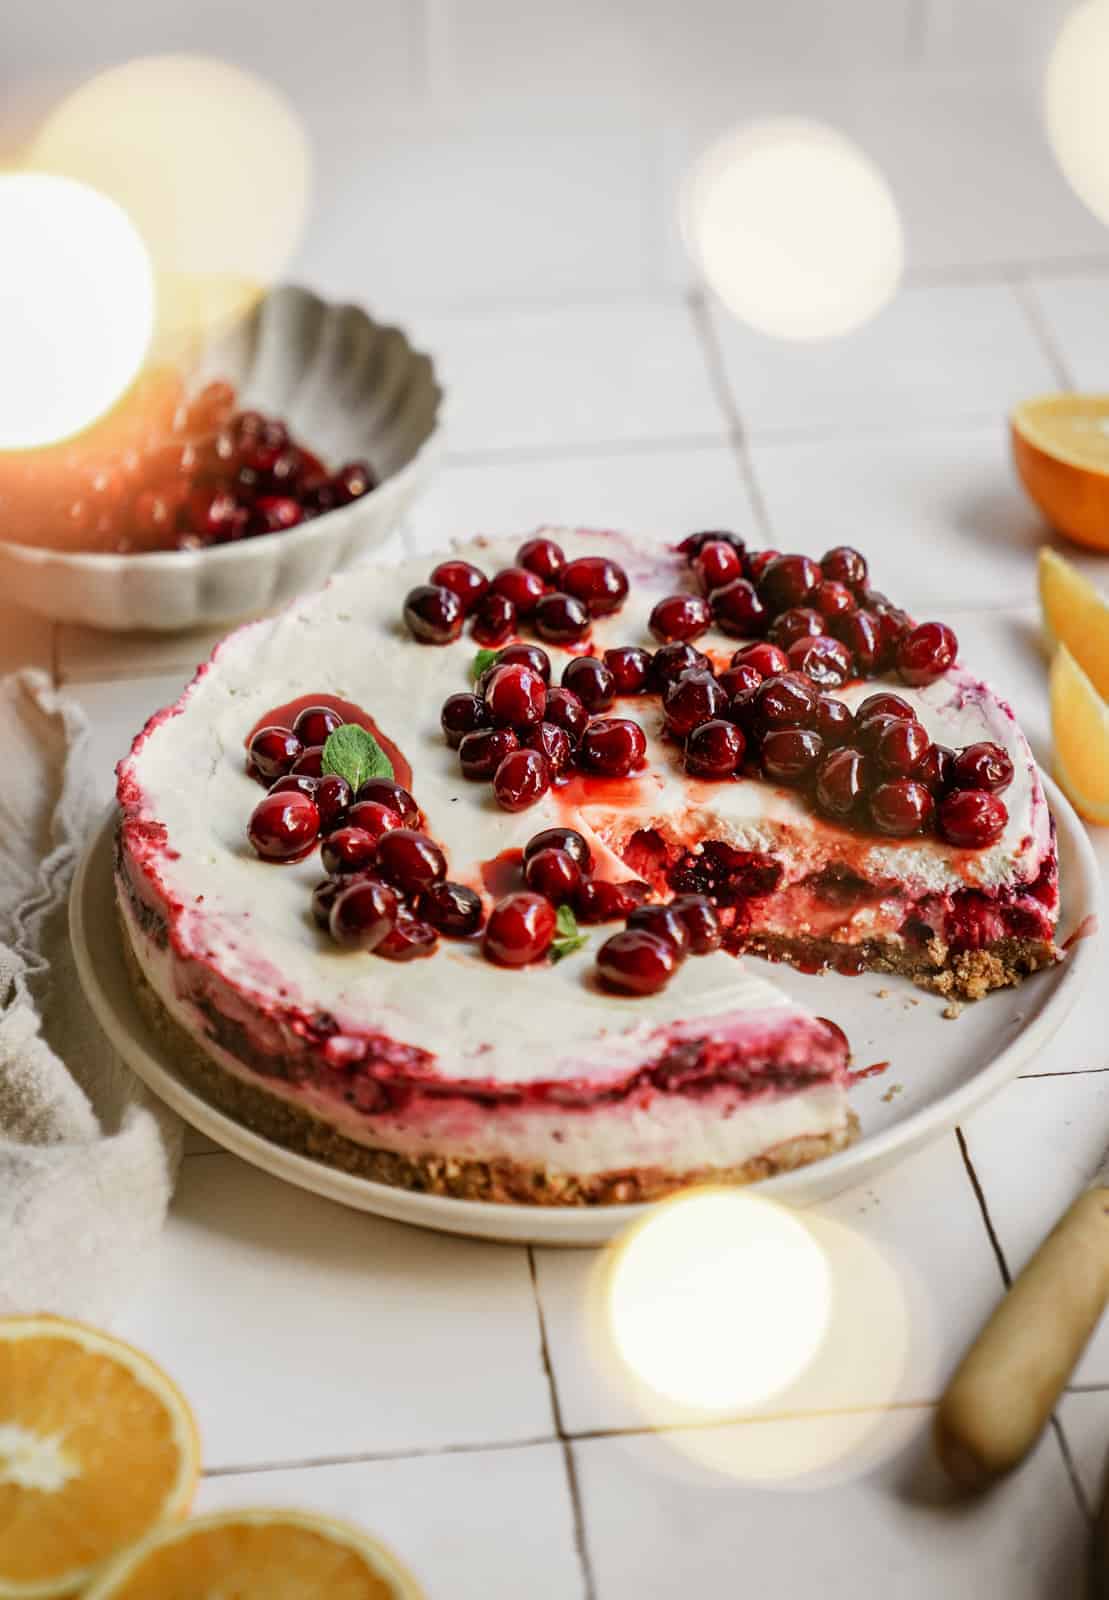 No-bake vegan cheesecake with cranberries on top, surrounded by oranges on countertop.